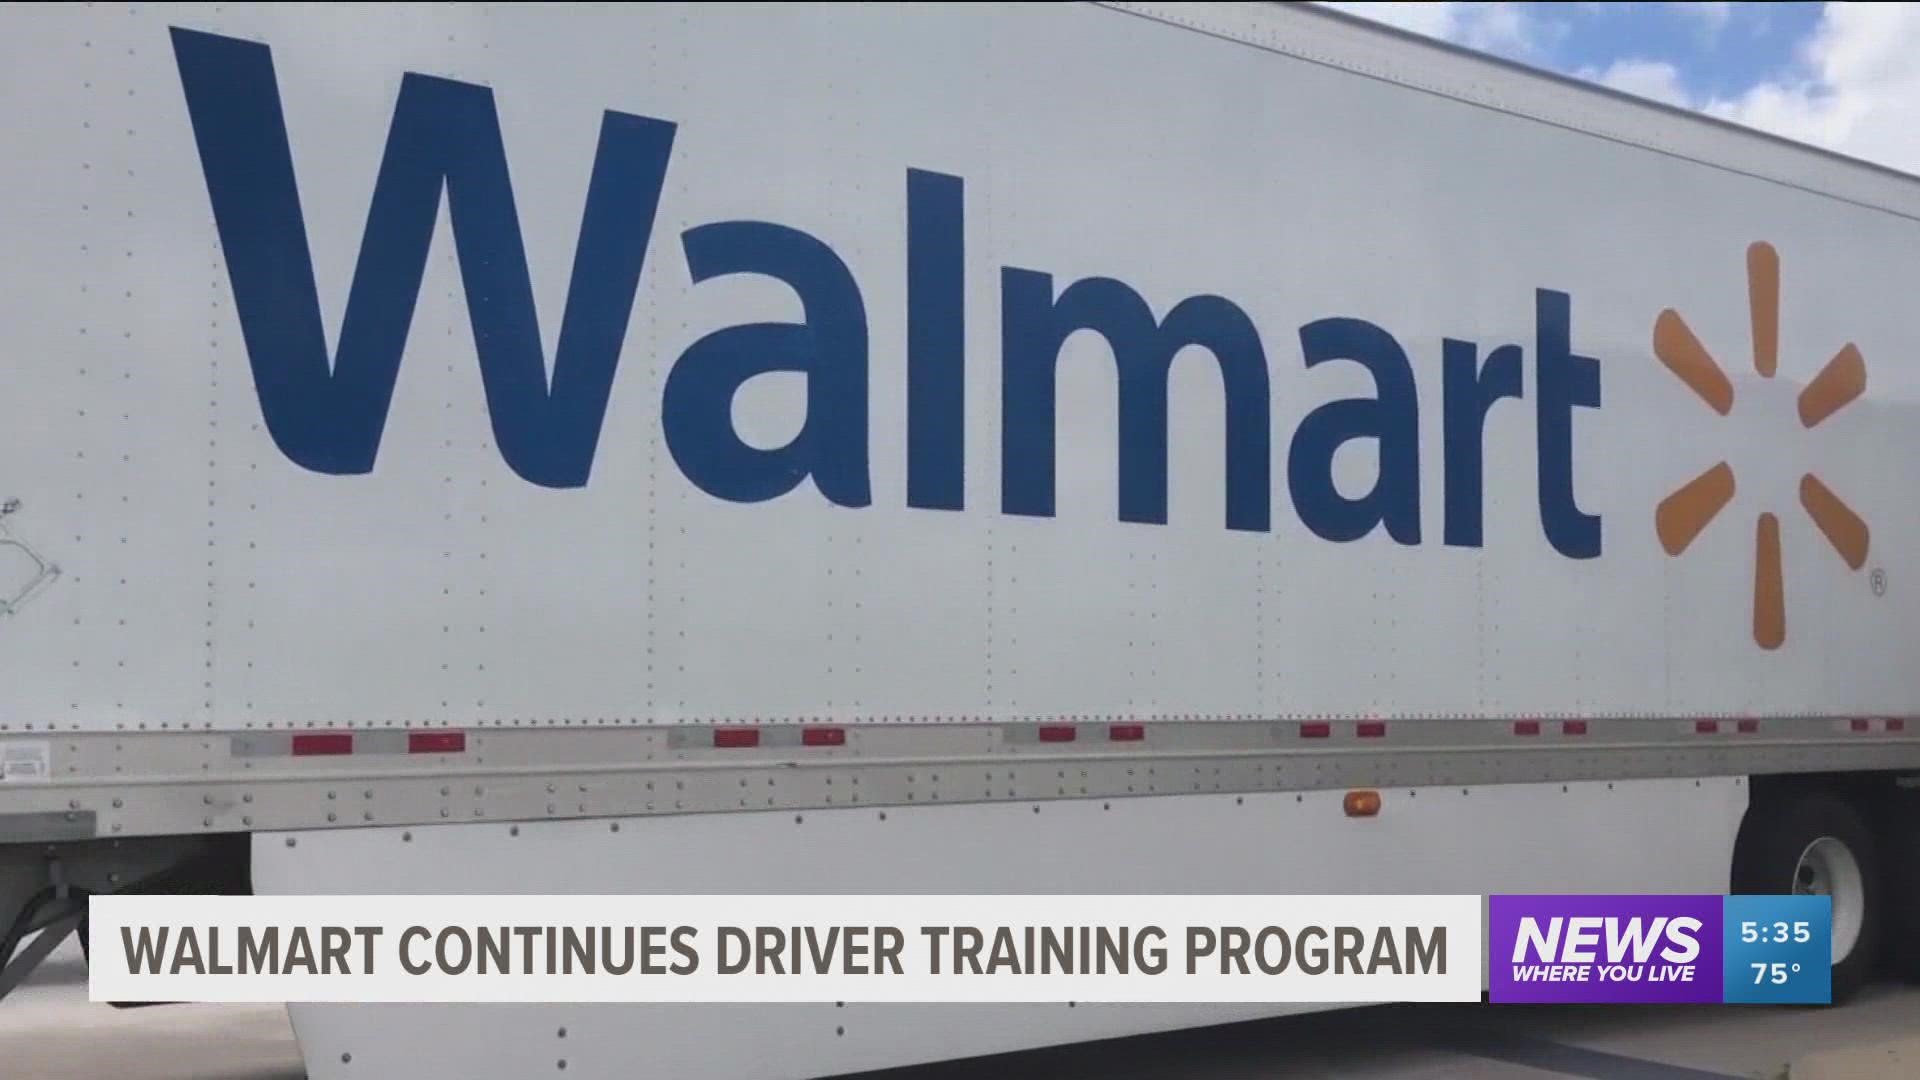 In late 2021, Walmart launched a 12-week training program for workers in other parts of the company to become certified truck drivers.